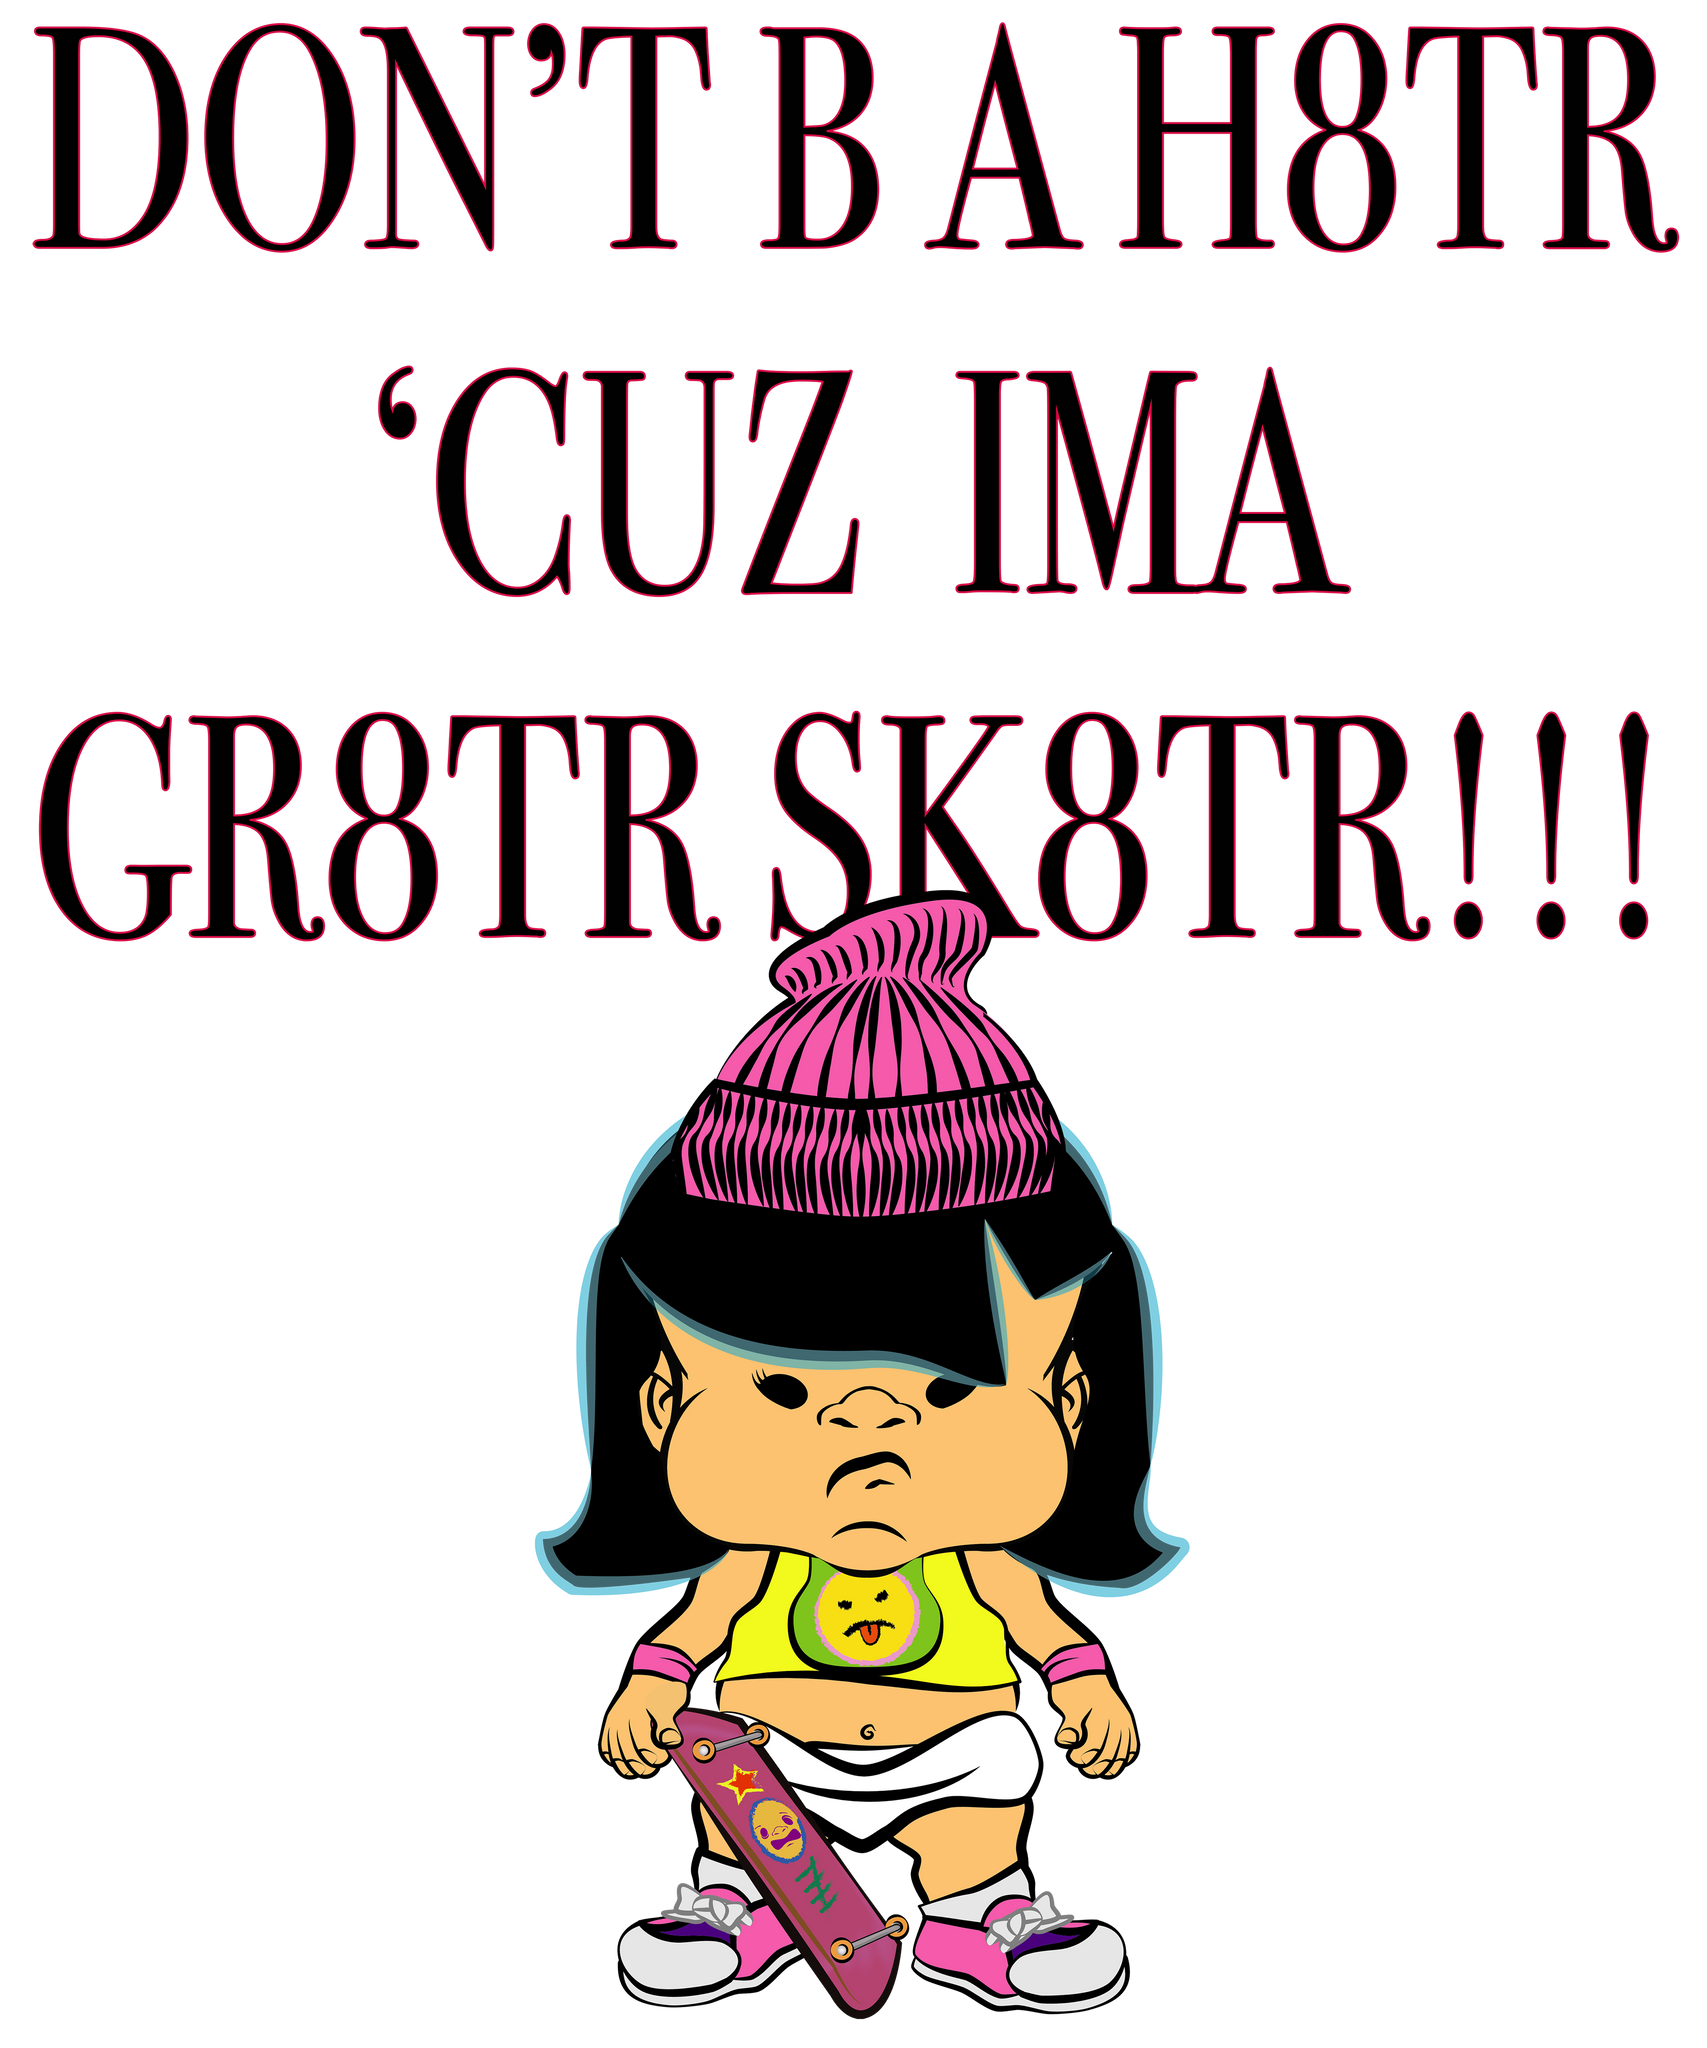 PBTZ0998_Skaterz_don't be a h8tr_girl_2